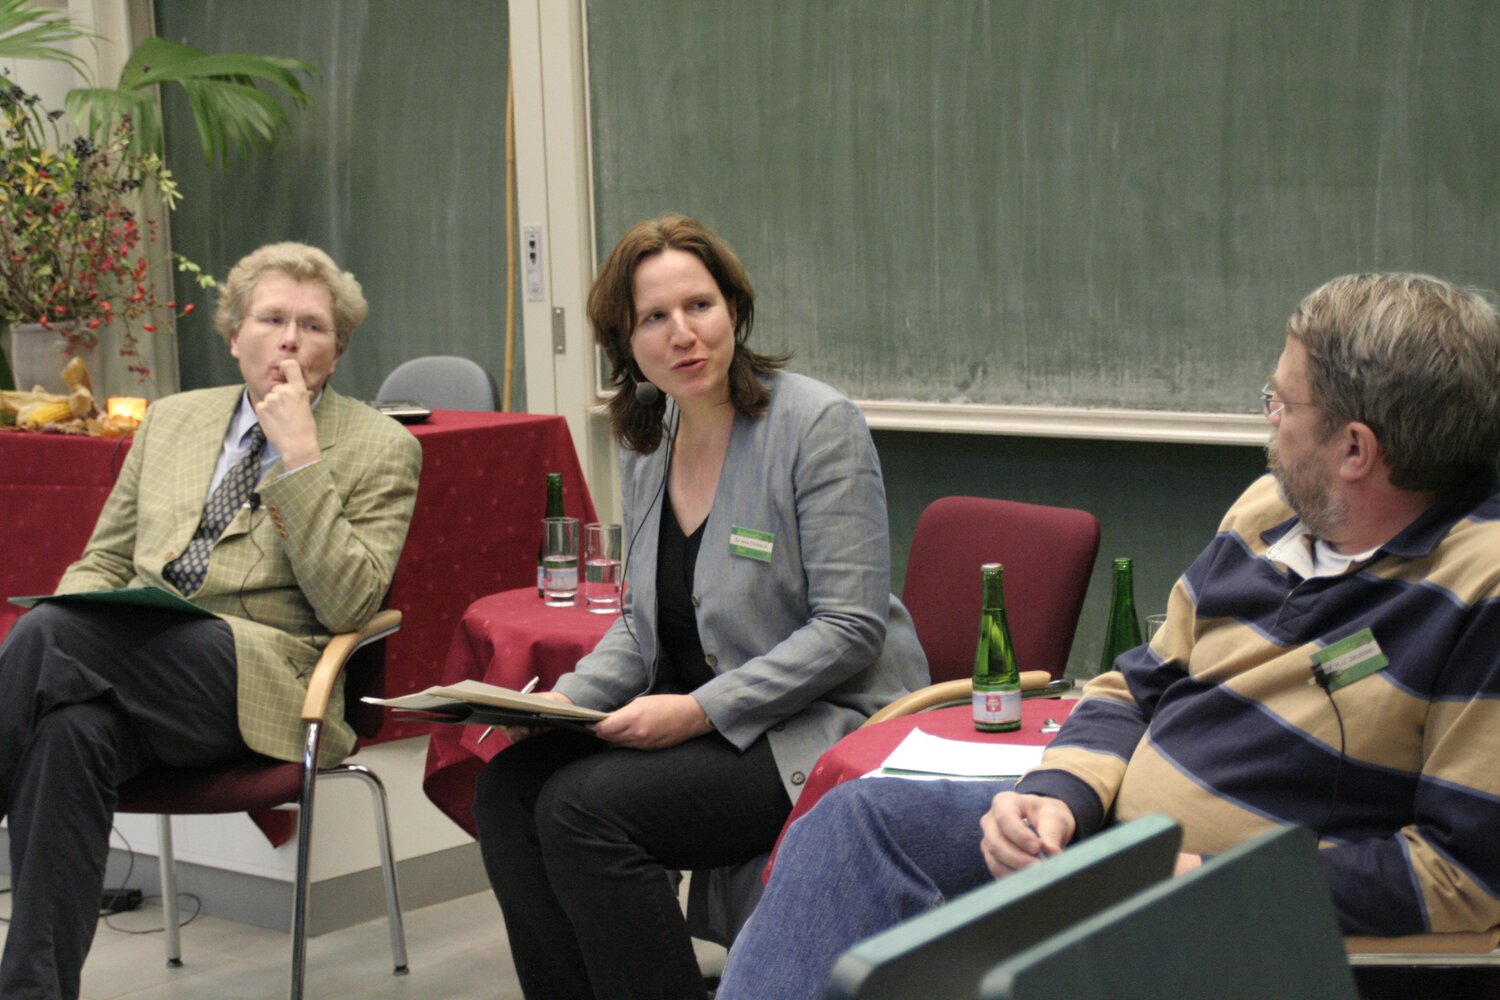 Anja Christinck (center) and colleagues at the 17th Witzenhausen Conference. (Photo: Witzenhausen Conference archives)